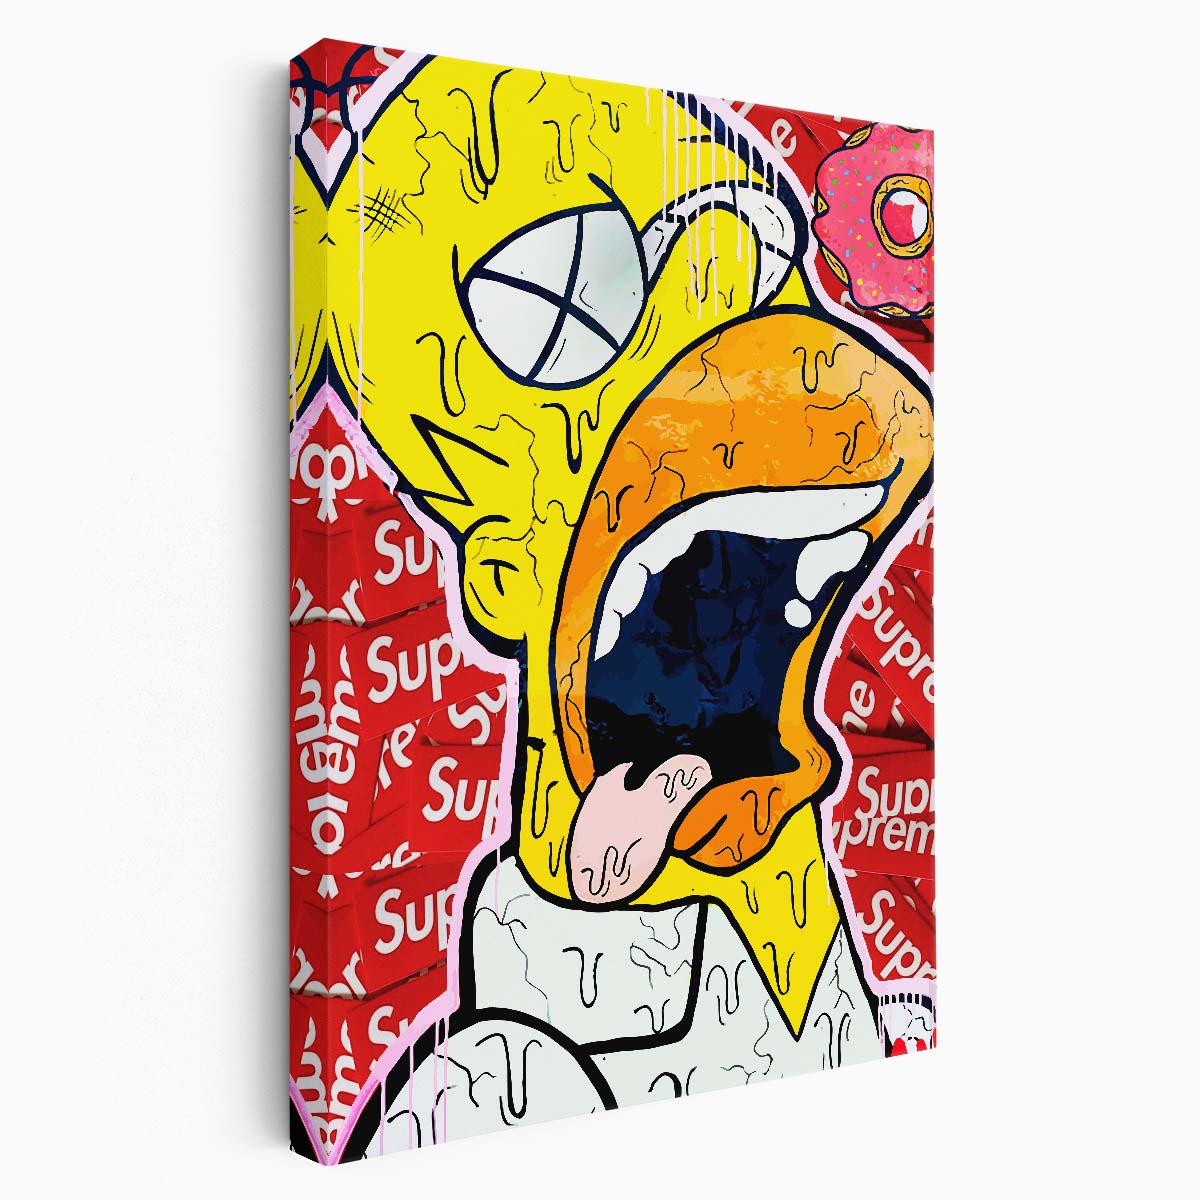 Supreme Lethargic Simpson Wall Art by Luxuriance Designs. Made in USA.